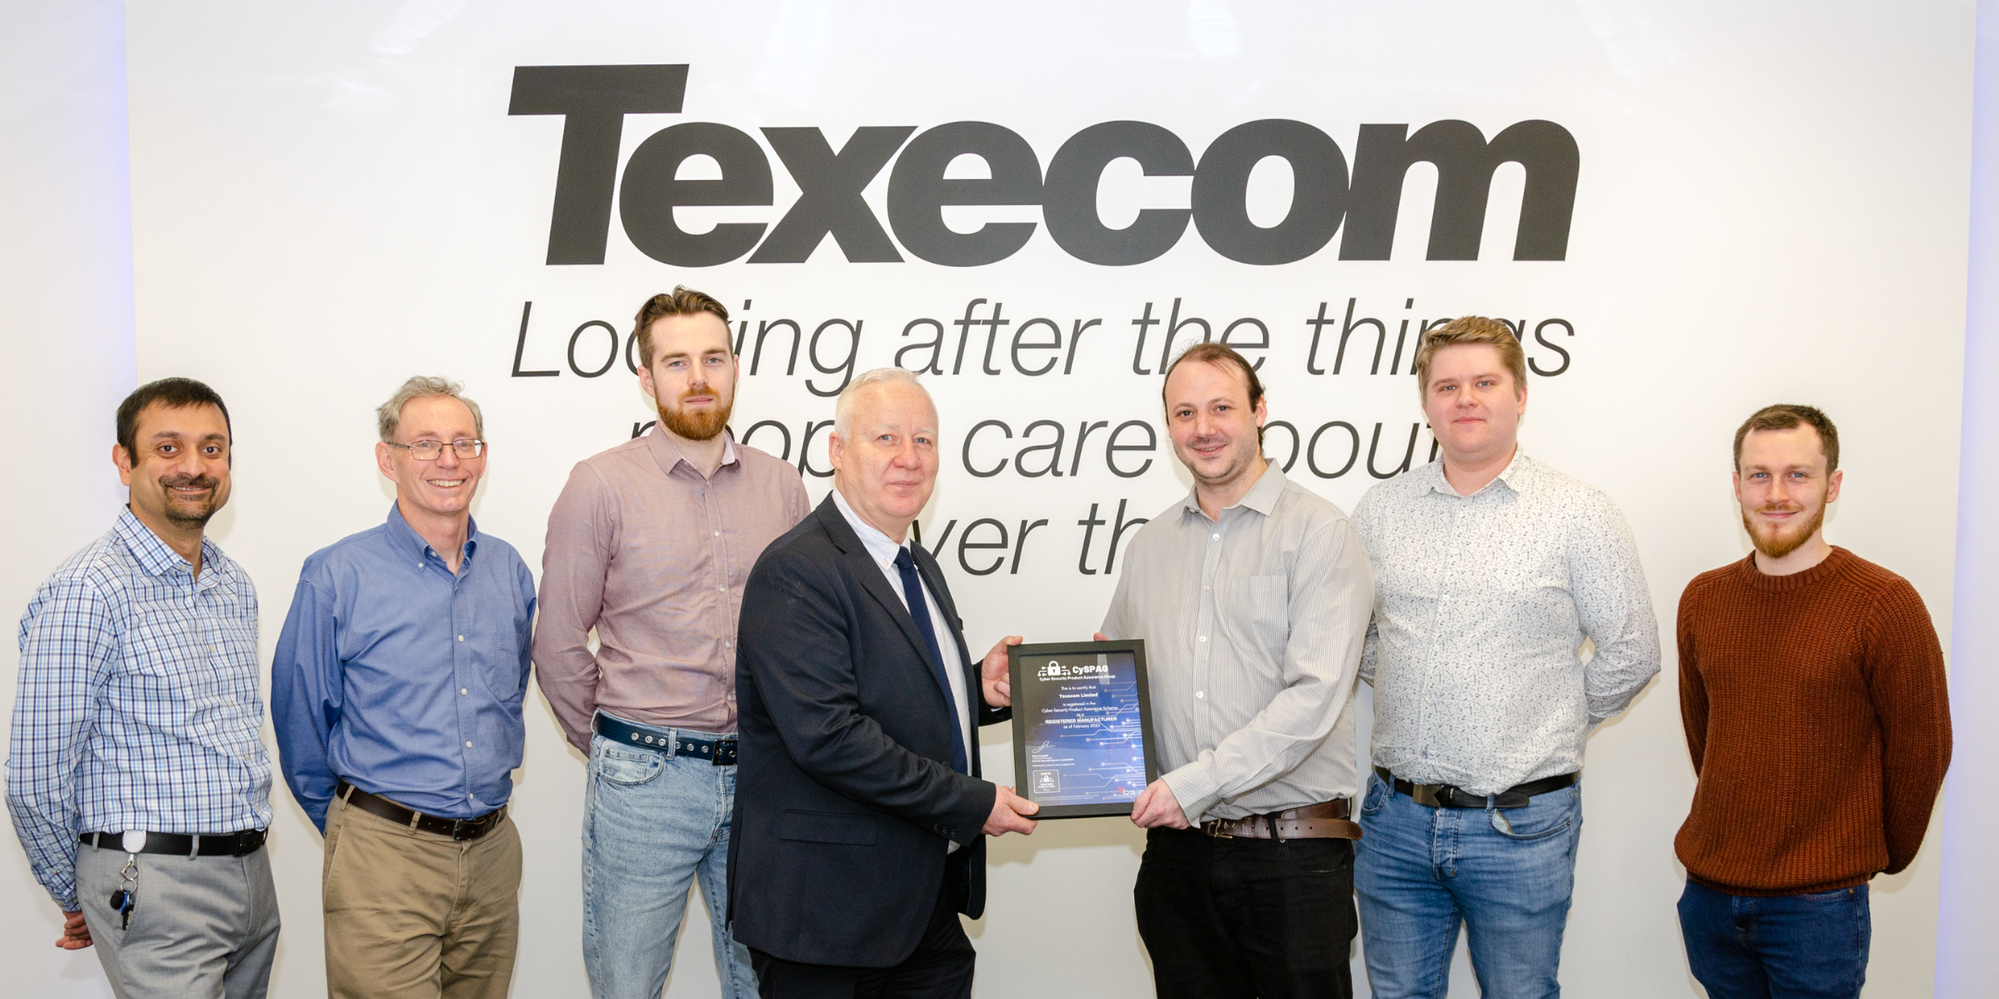 Texecom achieve cybersecurity accreditation from the BSIA